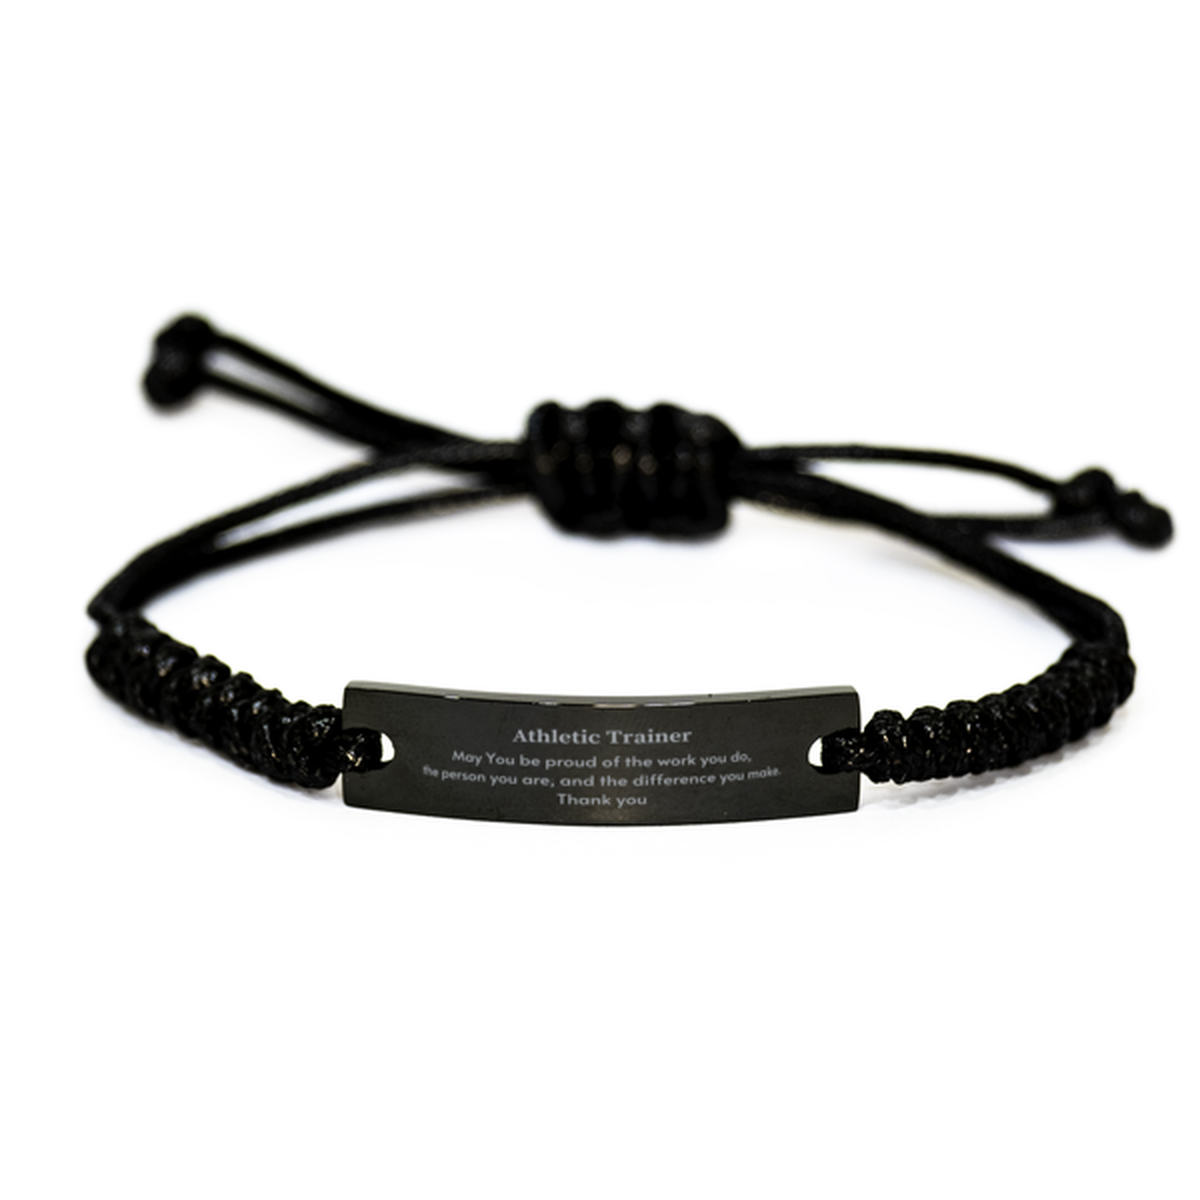 Heartwarming Black Rope Bracelet Retirement Coworkers Gifts for Athletic Trainer, Athletic Trainer May You be proud of the work you do, the person you are Gifts for Boss Men Women Friends